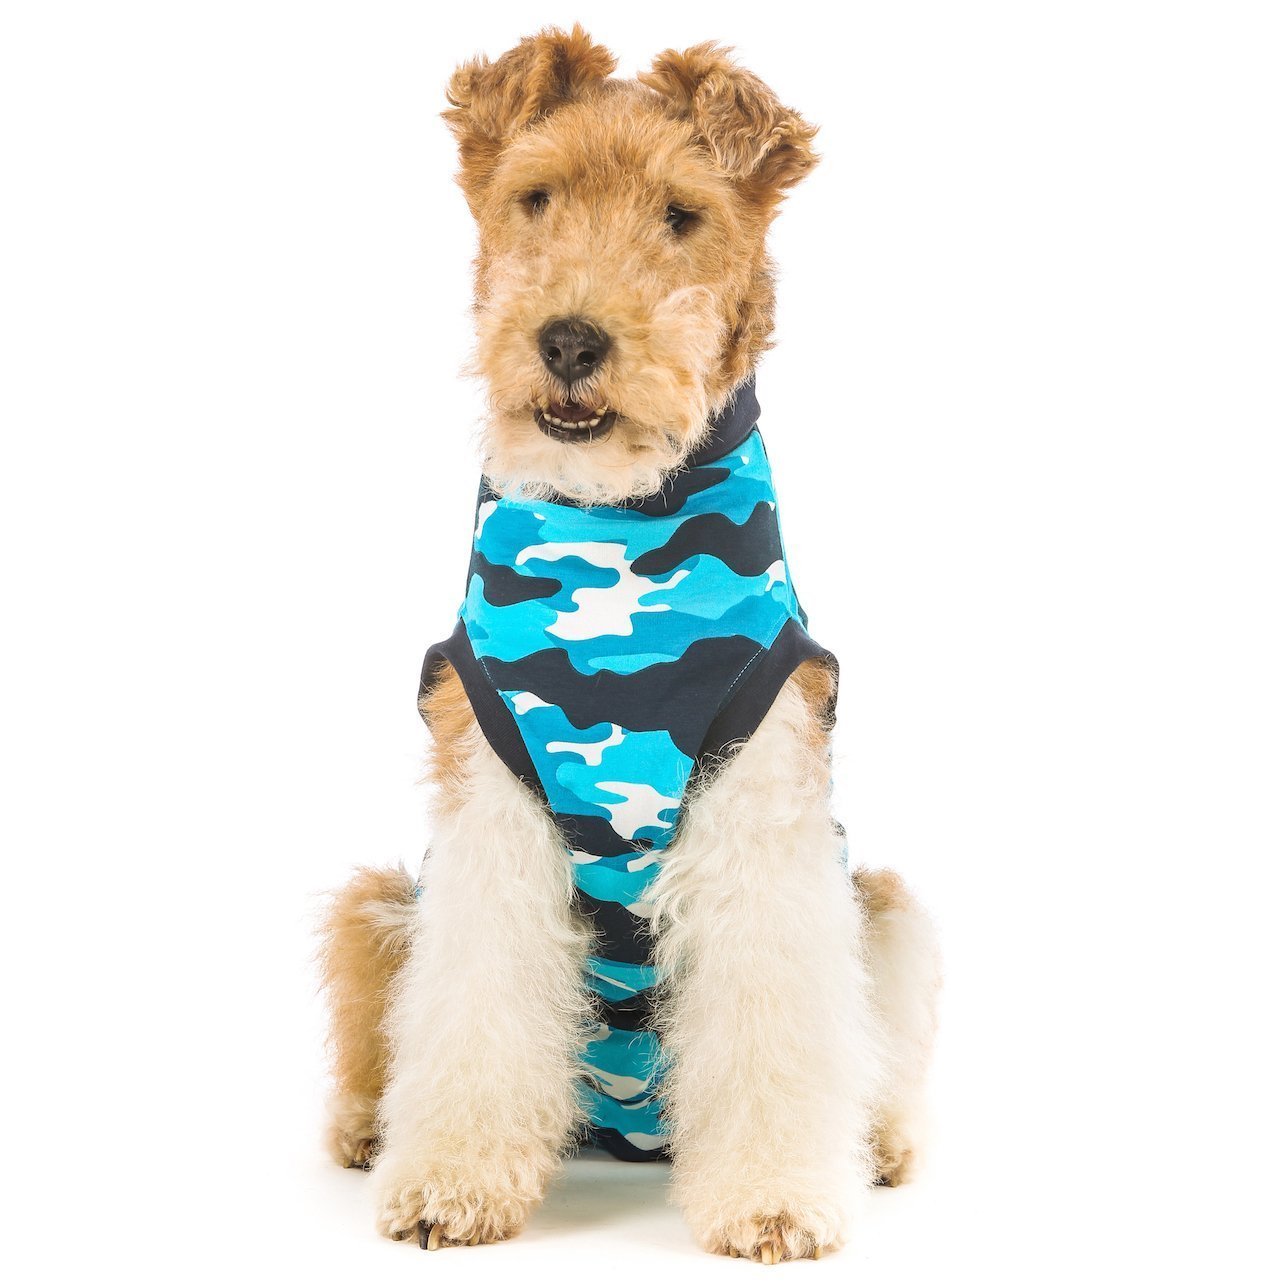 Suitical Recovery Suit for Dogs, Blue Camo, Medium